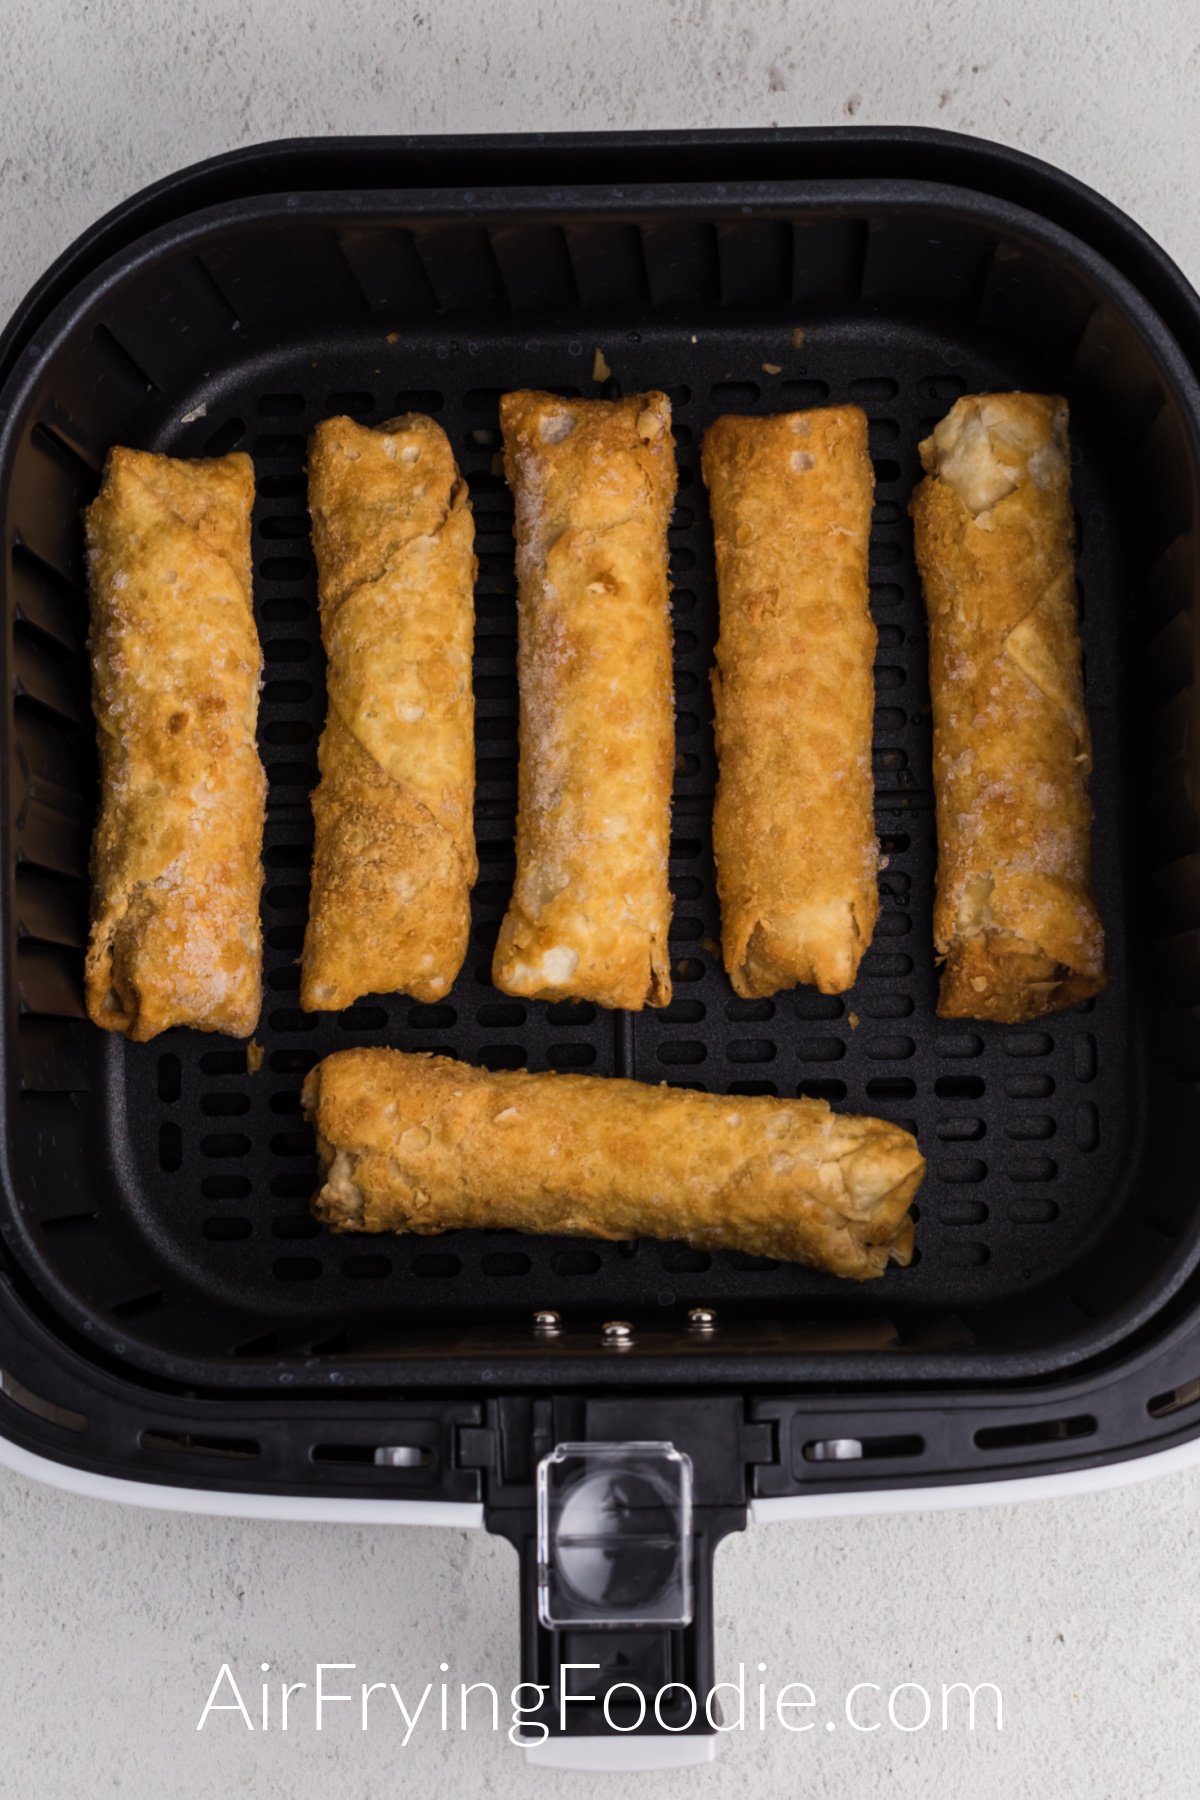 frozen egg rolls in the basket of the air fryer.